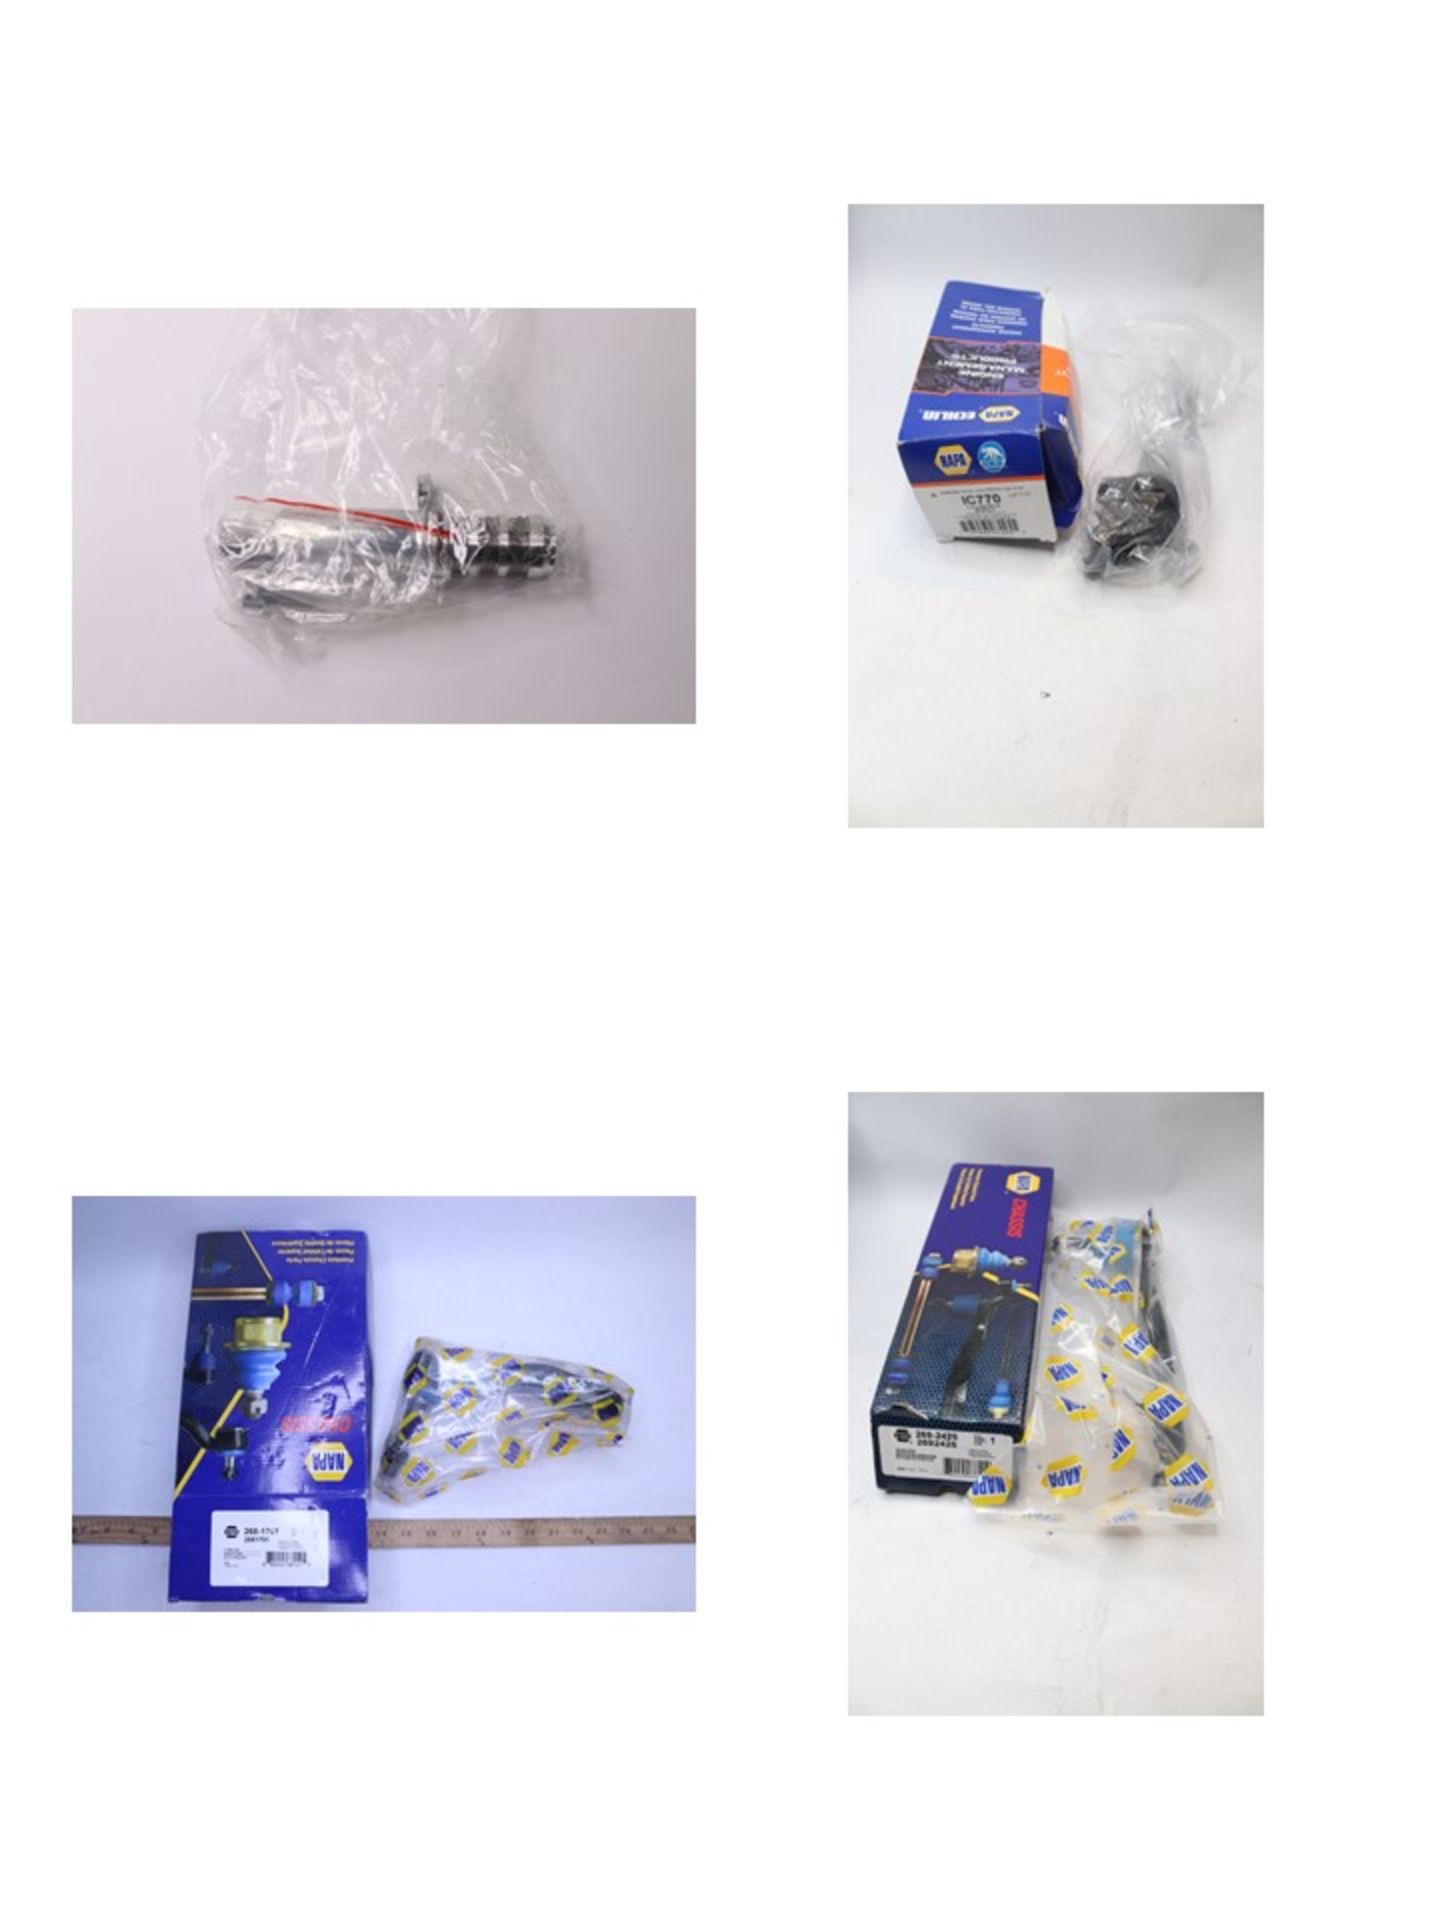 {LOT} 30k Retail Value of "NAPA AUTO PARTS" Items with 385 SKU's and 710+ Piece Quantity - Mostly - Image 13 of 113